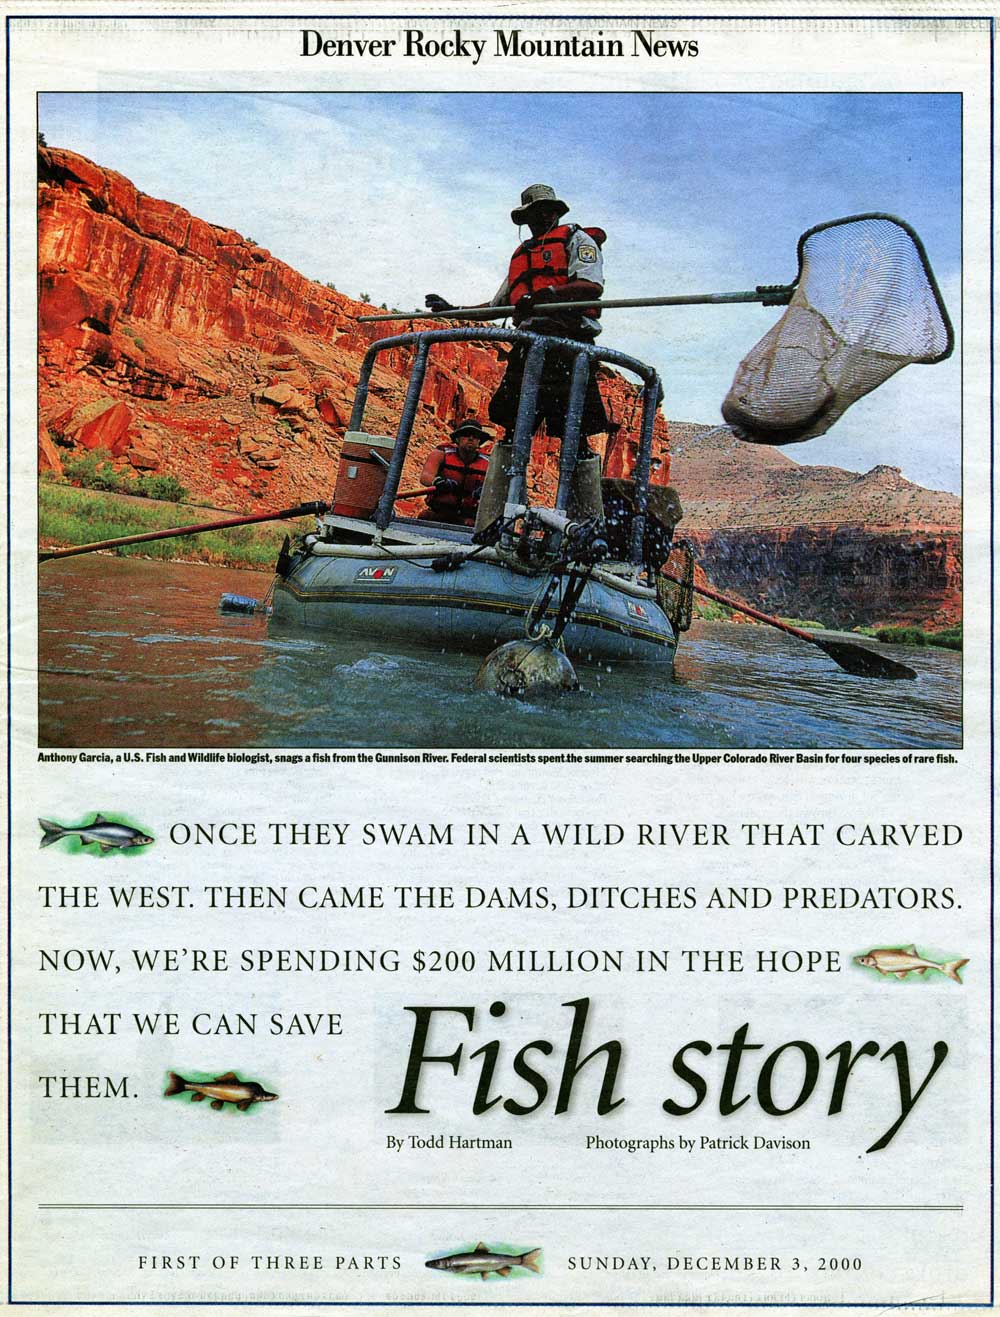 The cover of the Day 1 of the Fish Story series in Dec. 3, 2000 edition of the Rocky Mountain News.